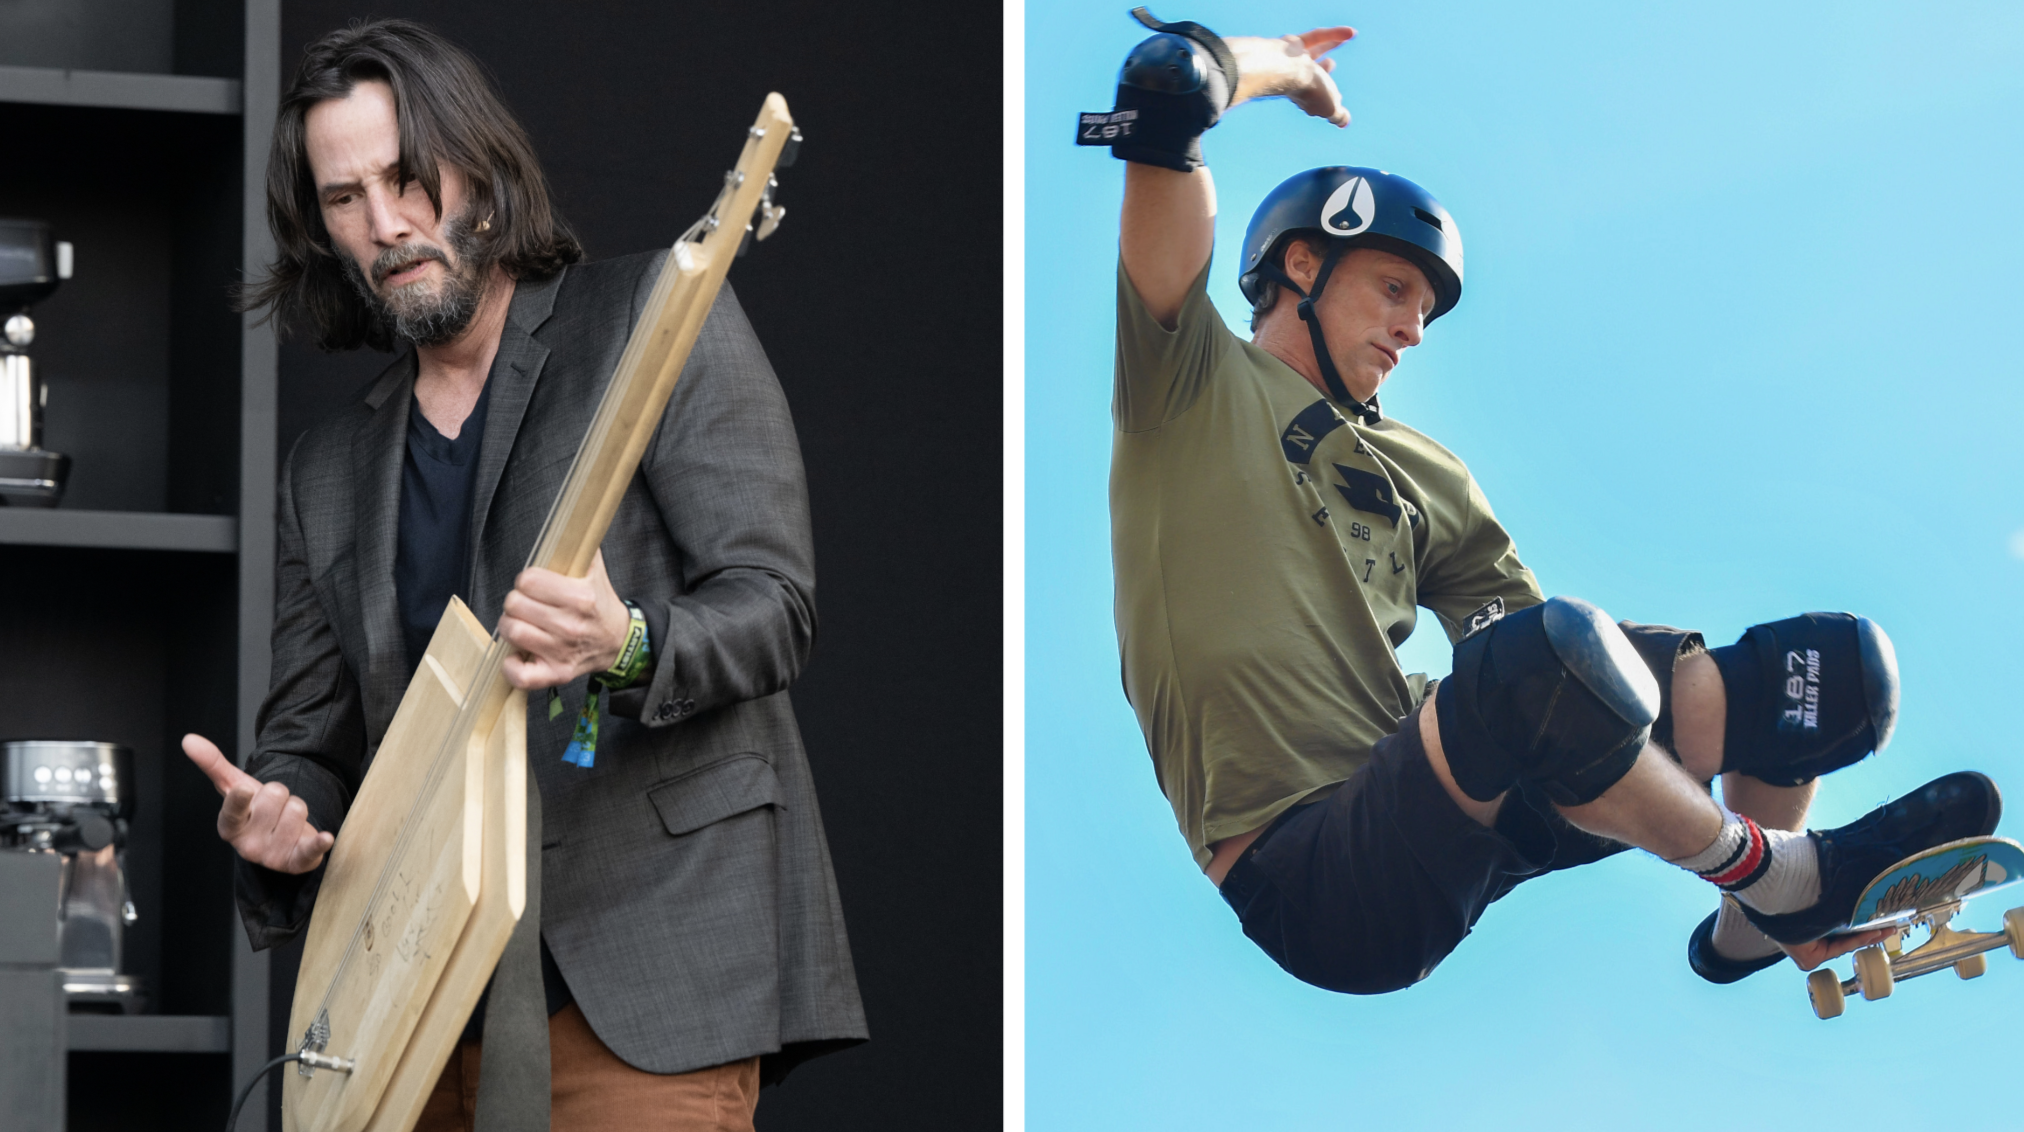 “Music was just a huge part of skating”: Keanu Reeves and Tony Hawk talk about the skating/music crossover